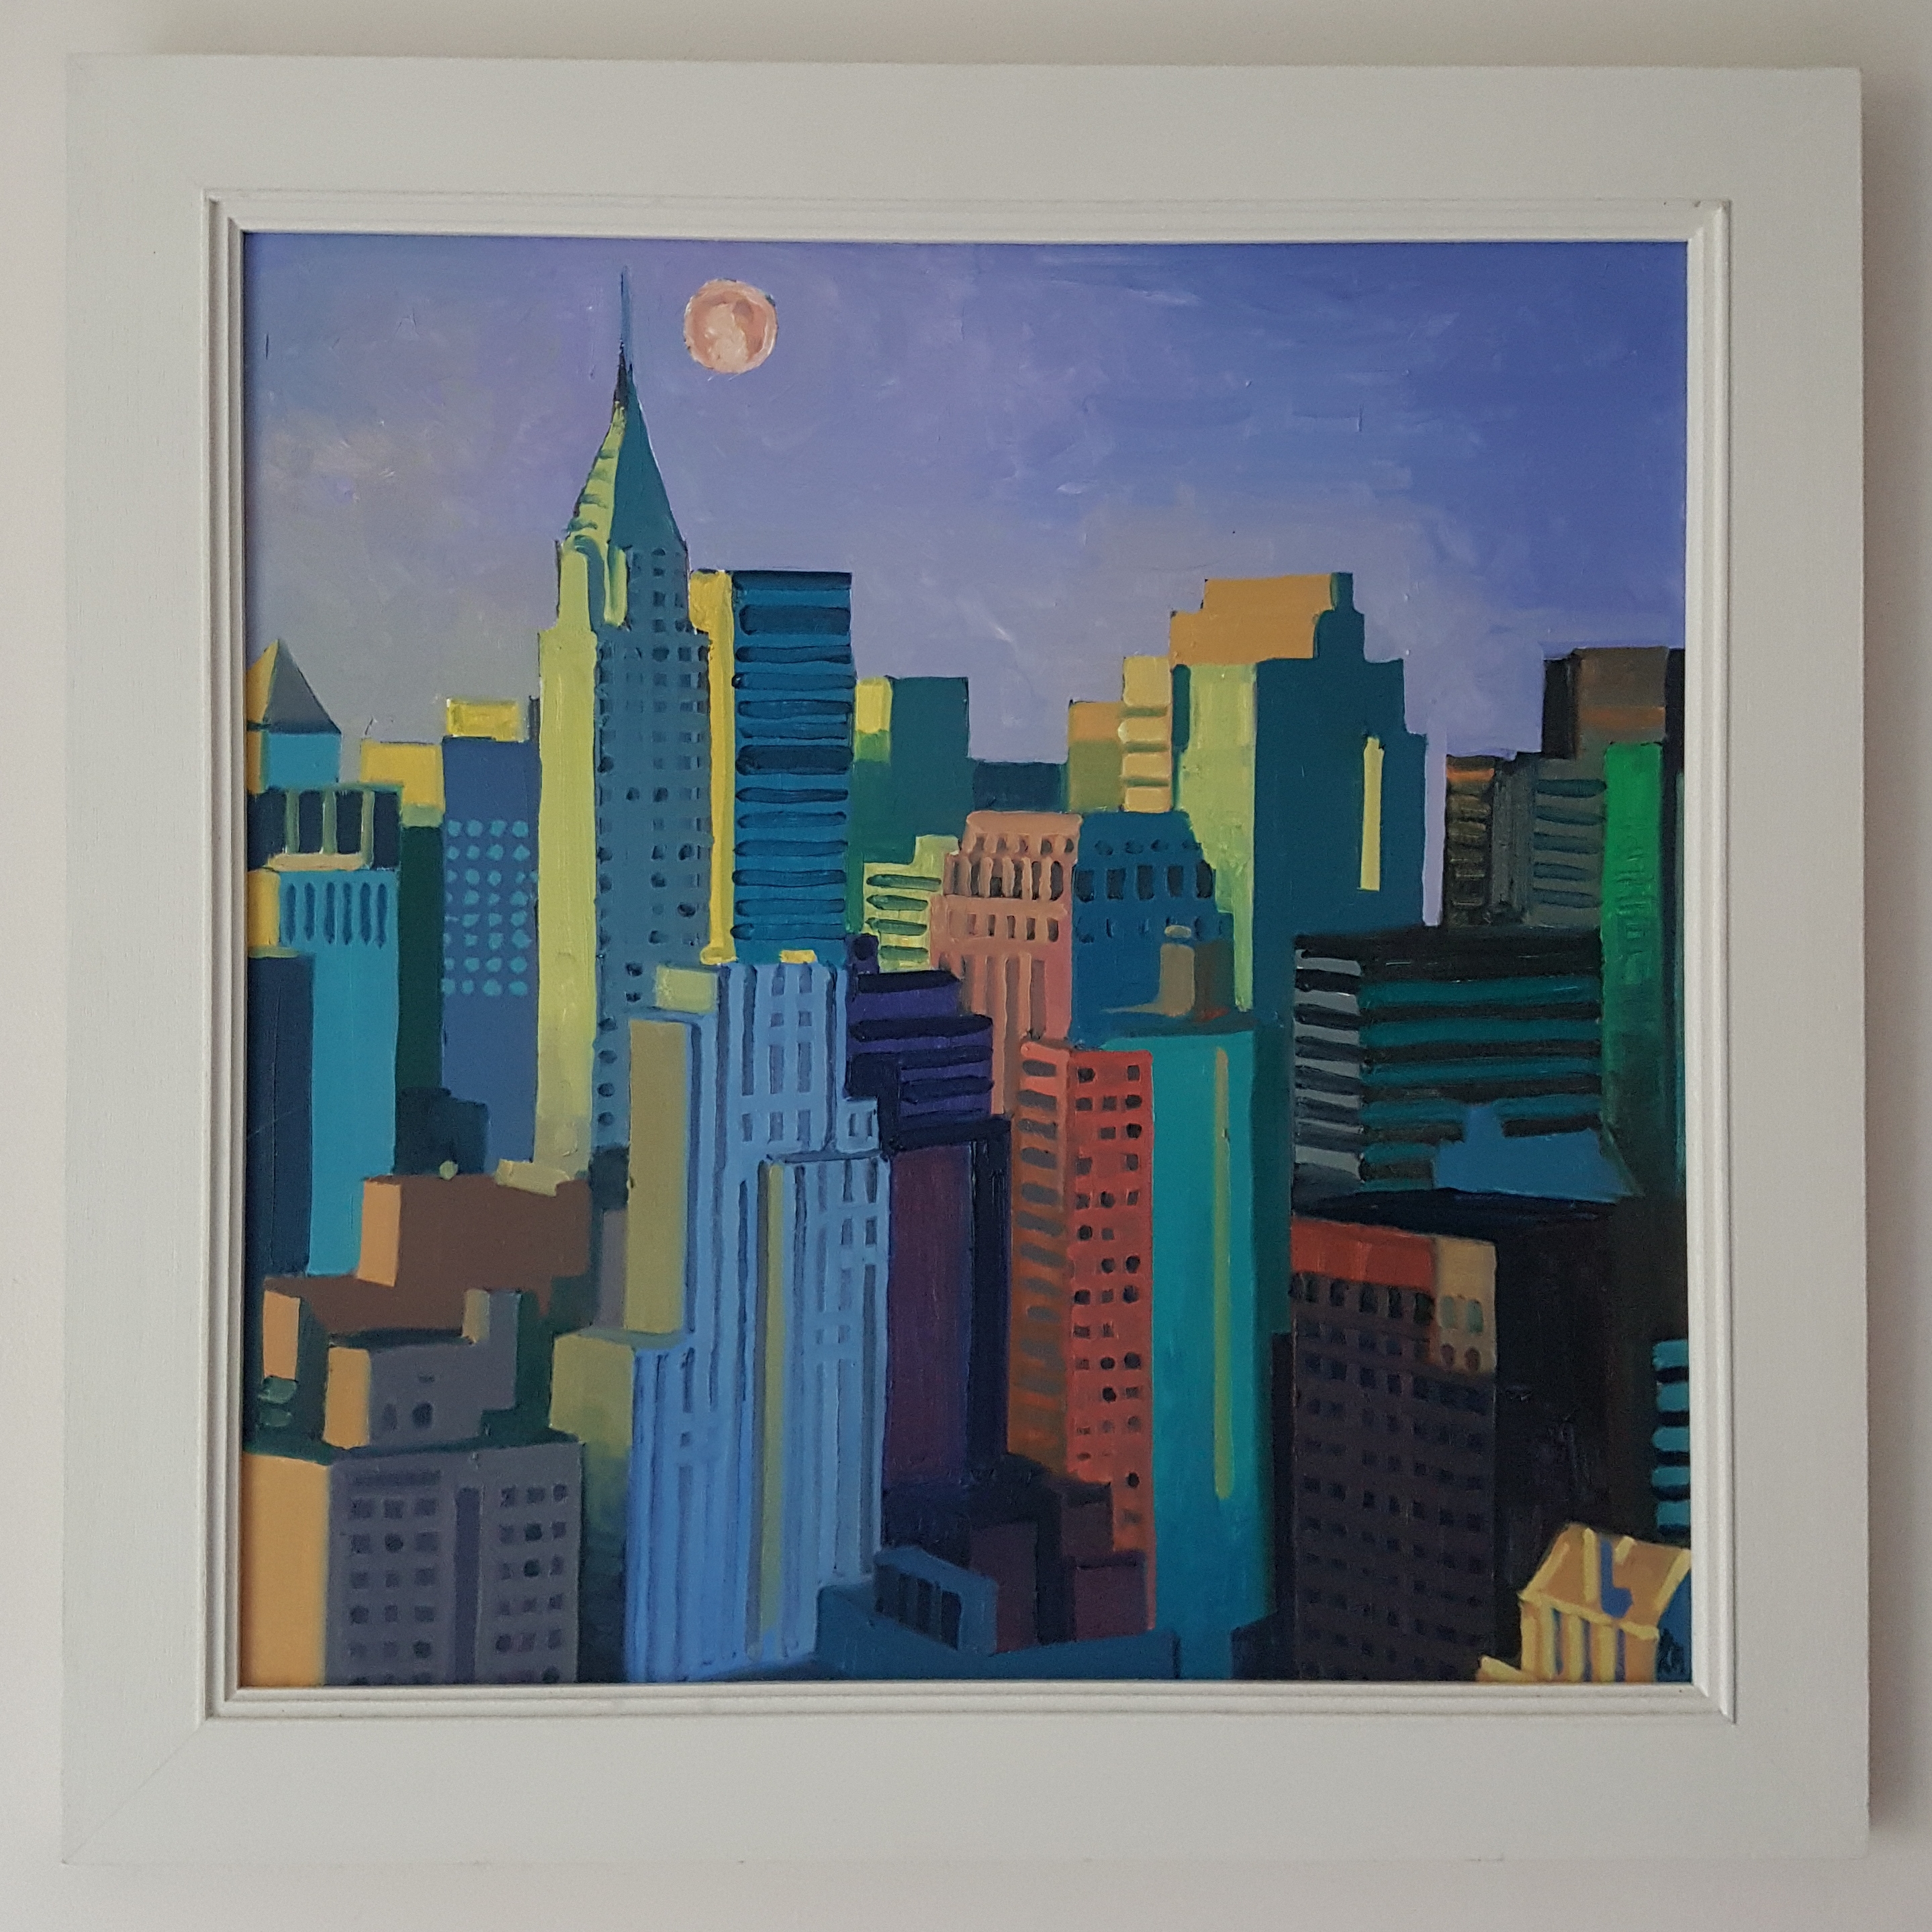 Andrew Halliday, "Blood moon over Manhattan", framed oil on board, 2018, 53 x 53cm framed. This - Image 2 of 2